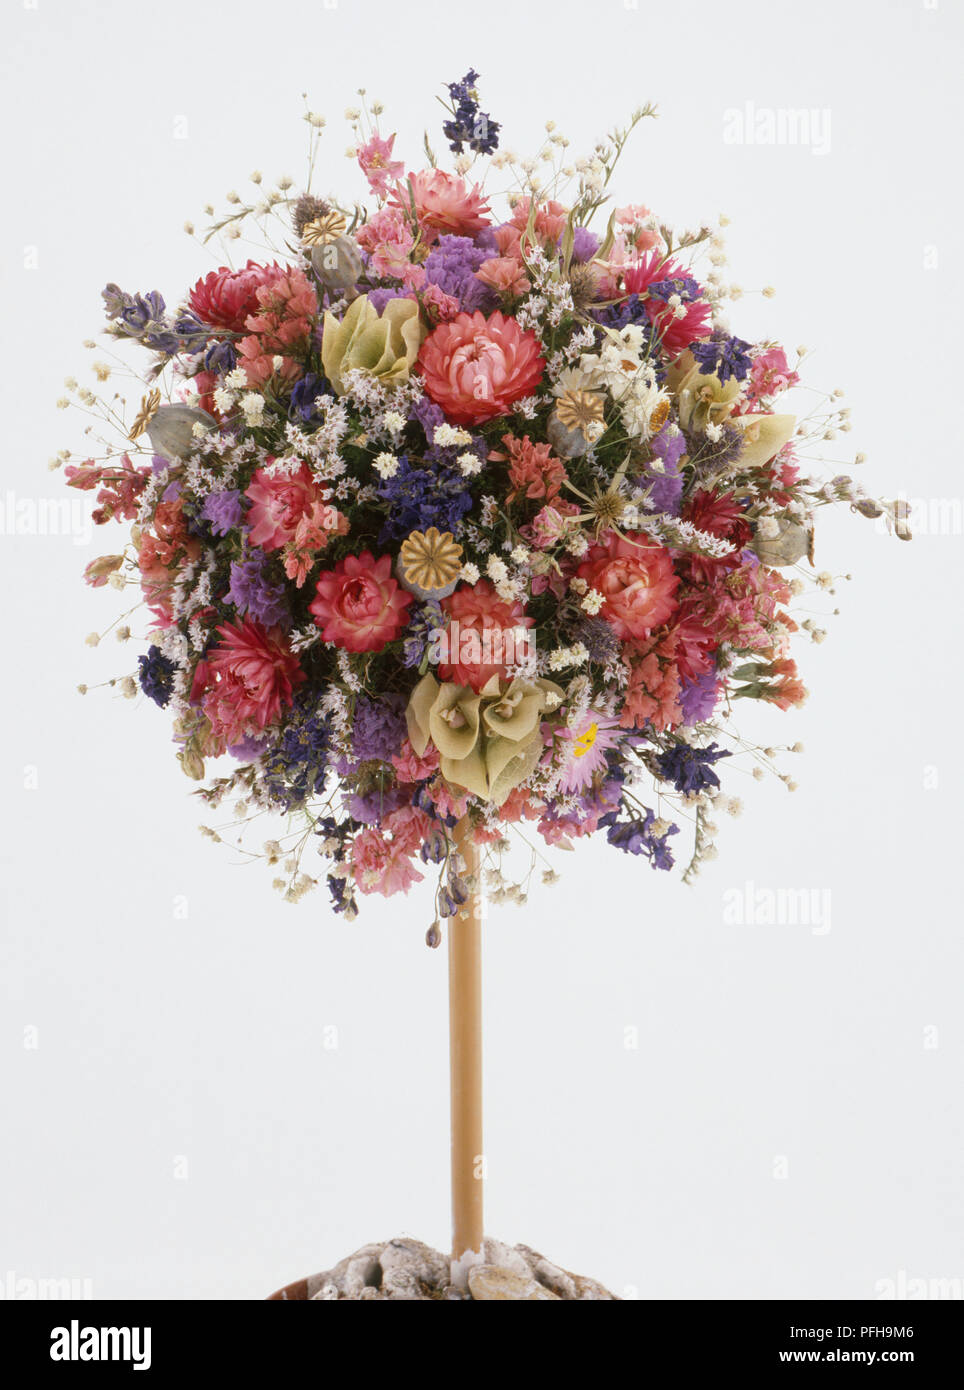 Dried flower tree with pink purple and white flowers Stock Photo